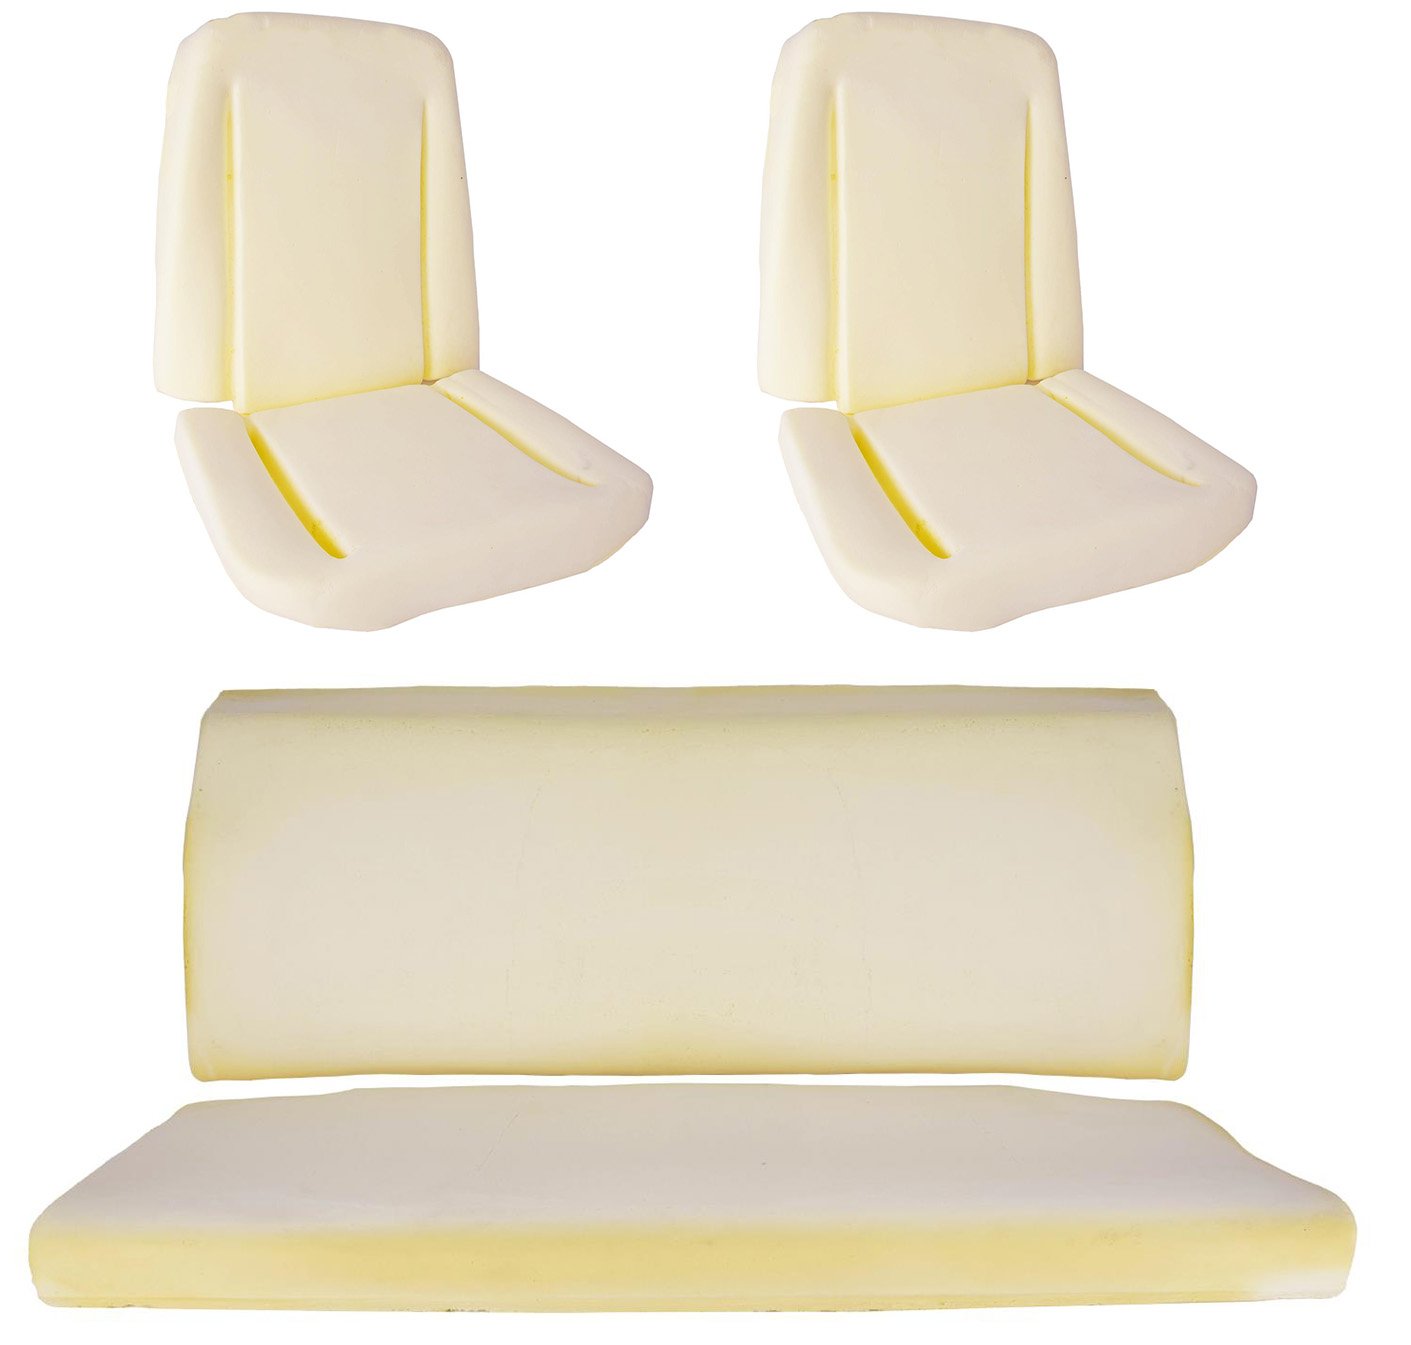 JEGS 555-90571K2 Seat Foam Kit Fits Select 1970 Buick, Chevrolet,  Oldsmobile, Pontiac Models [Coupe] - JEGS